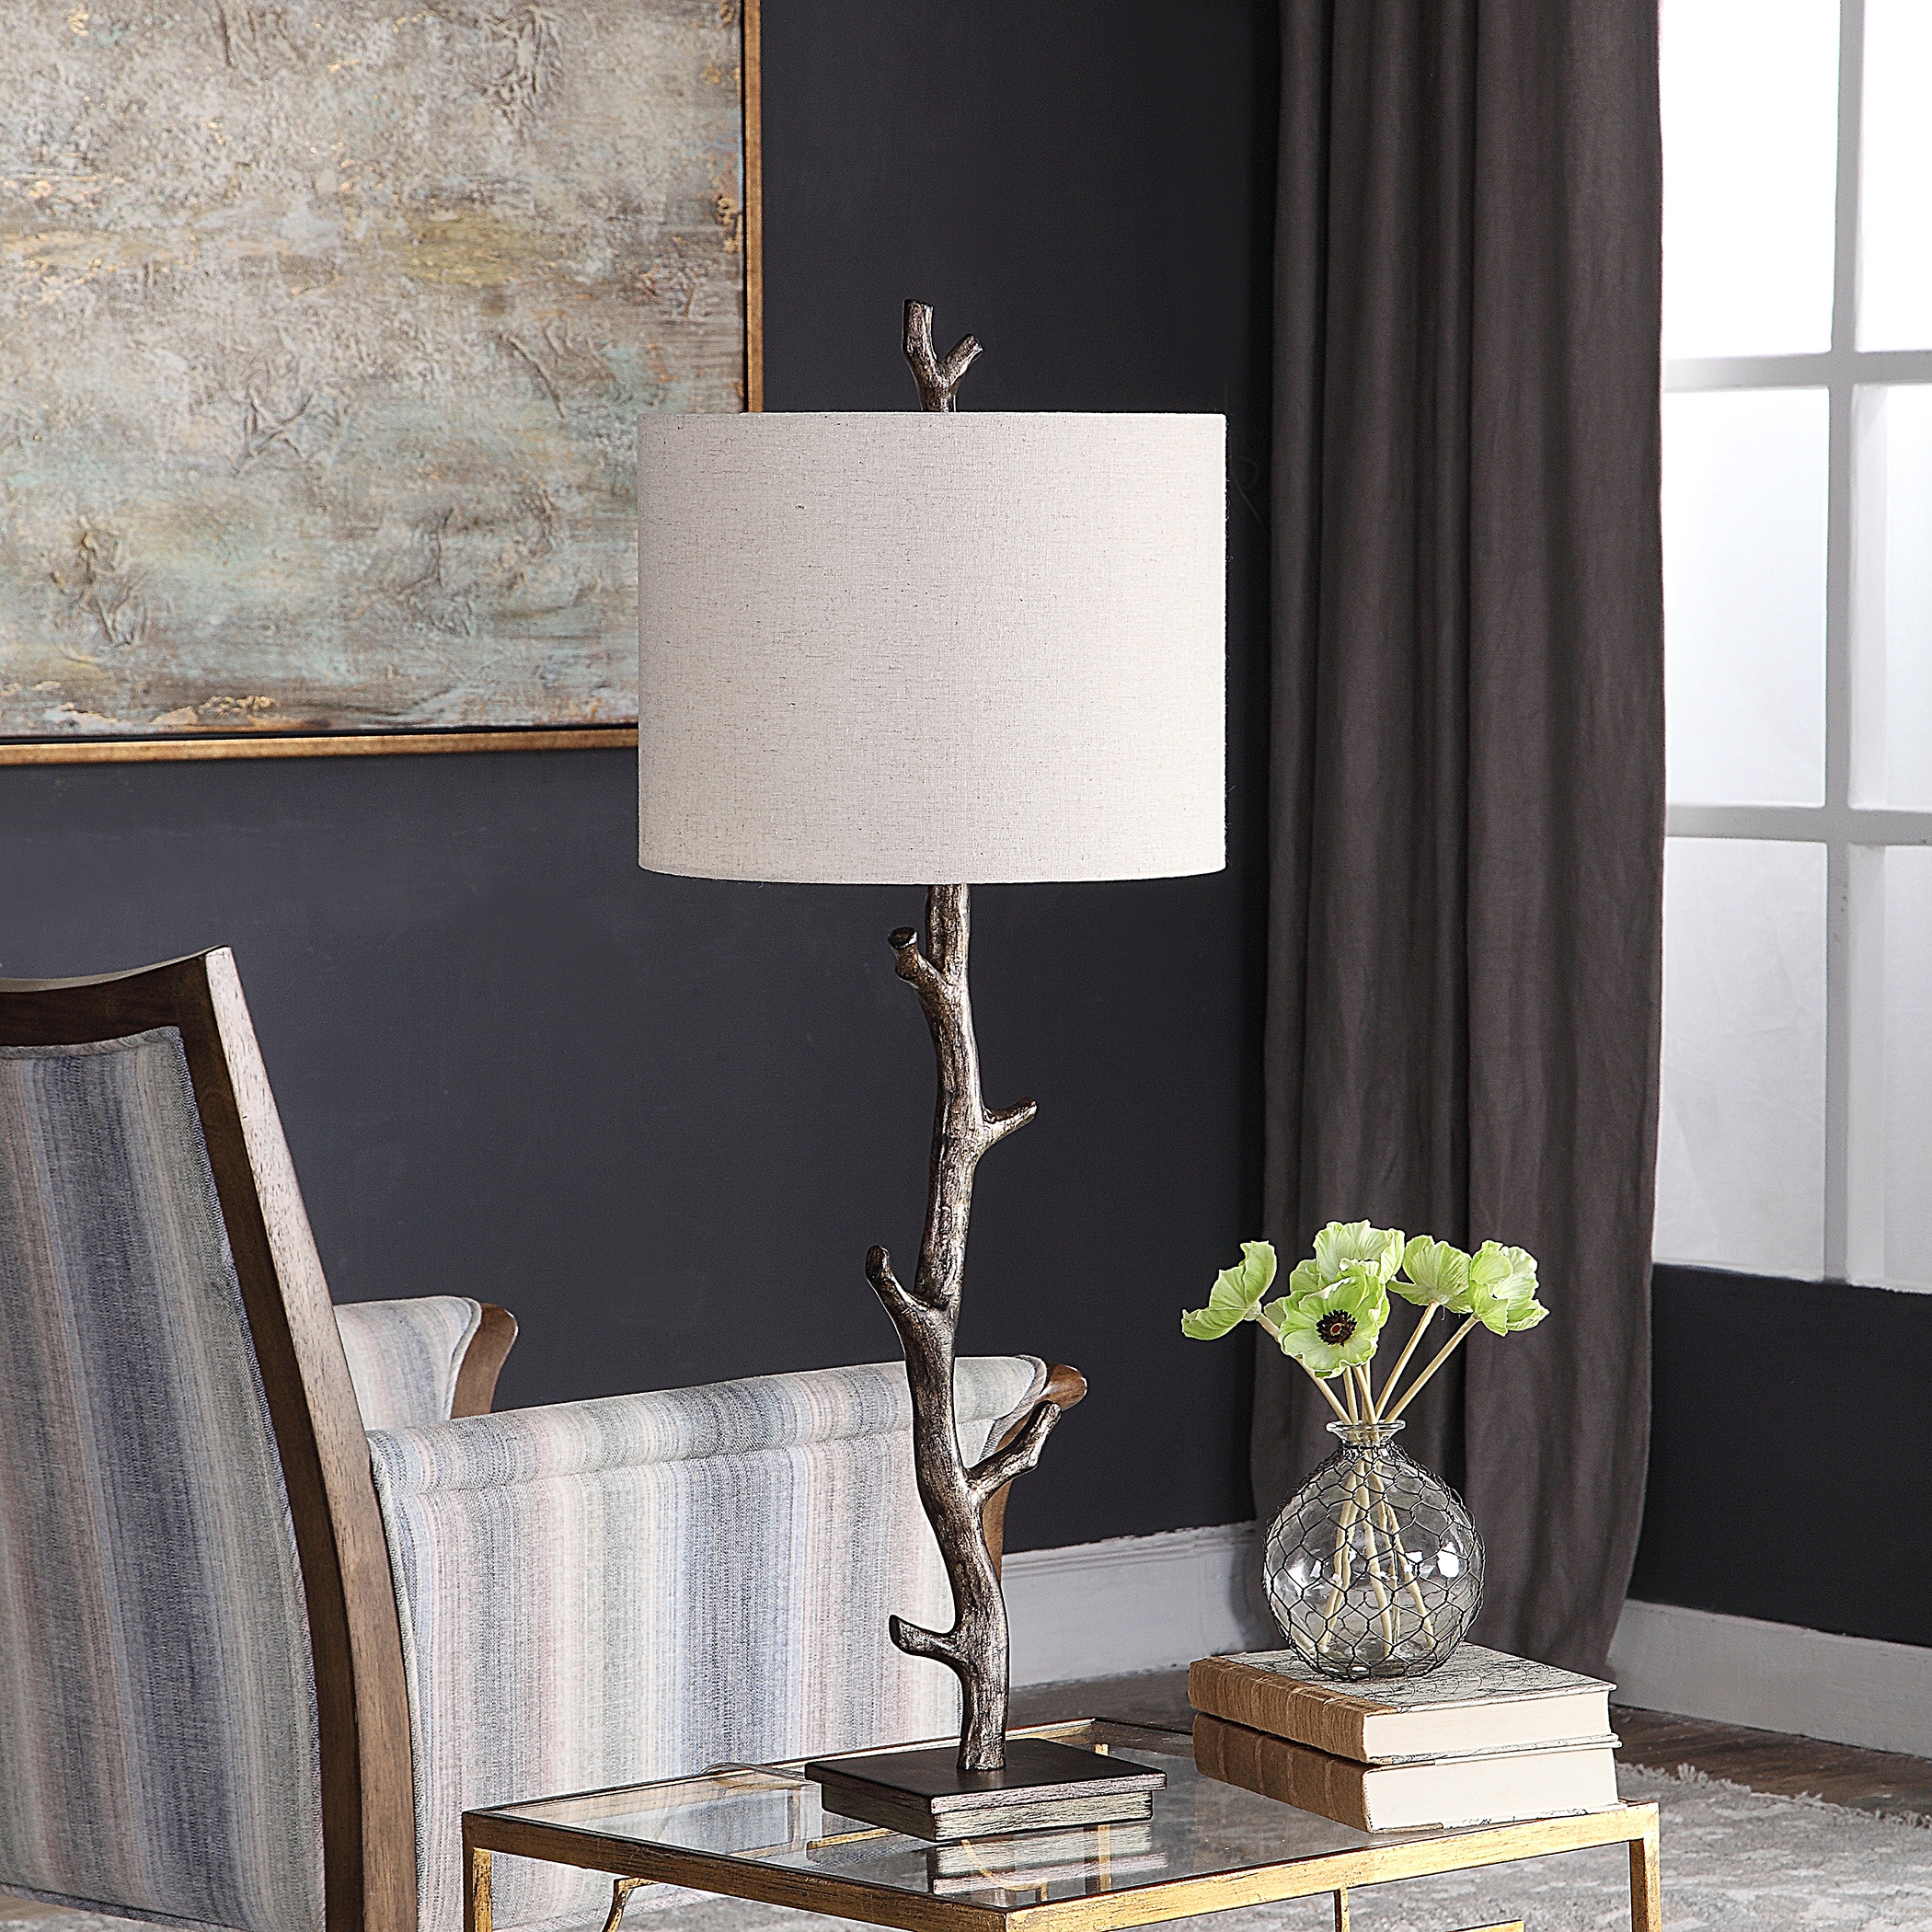 TABLE LAMP - Image 4